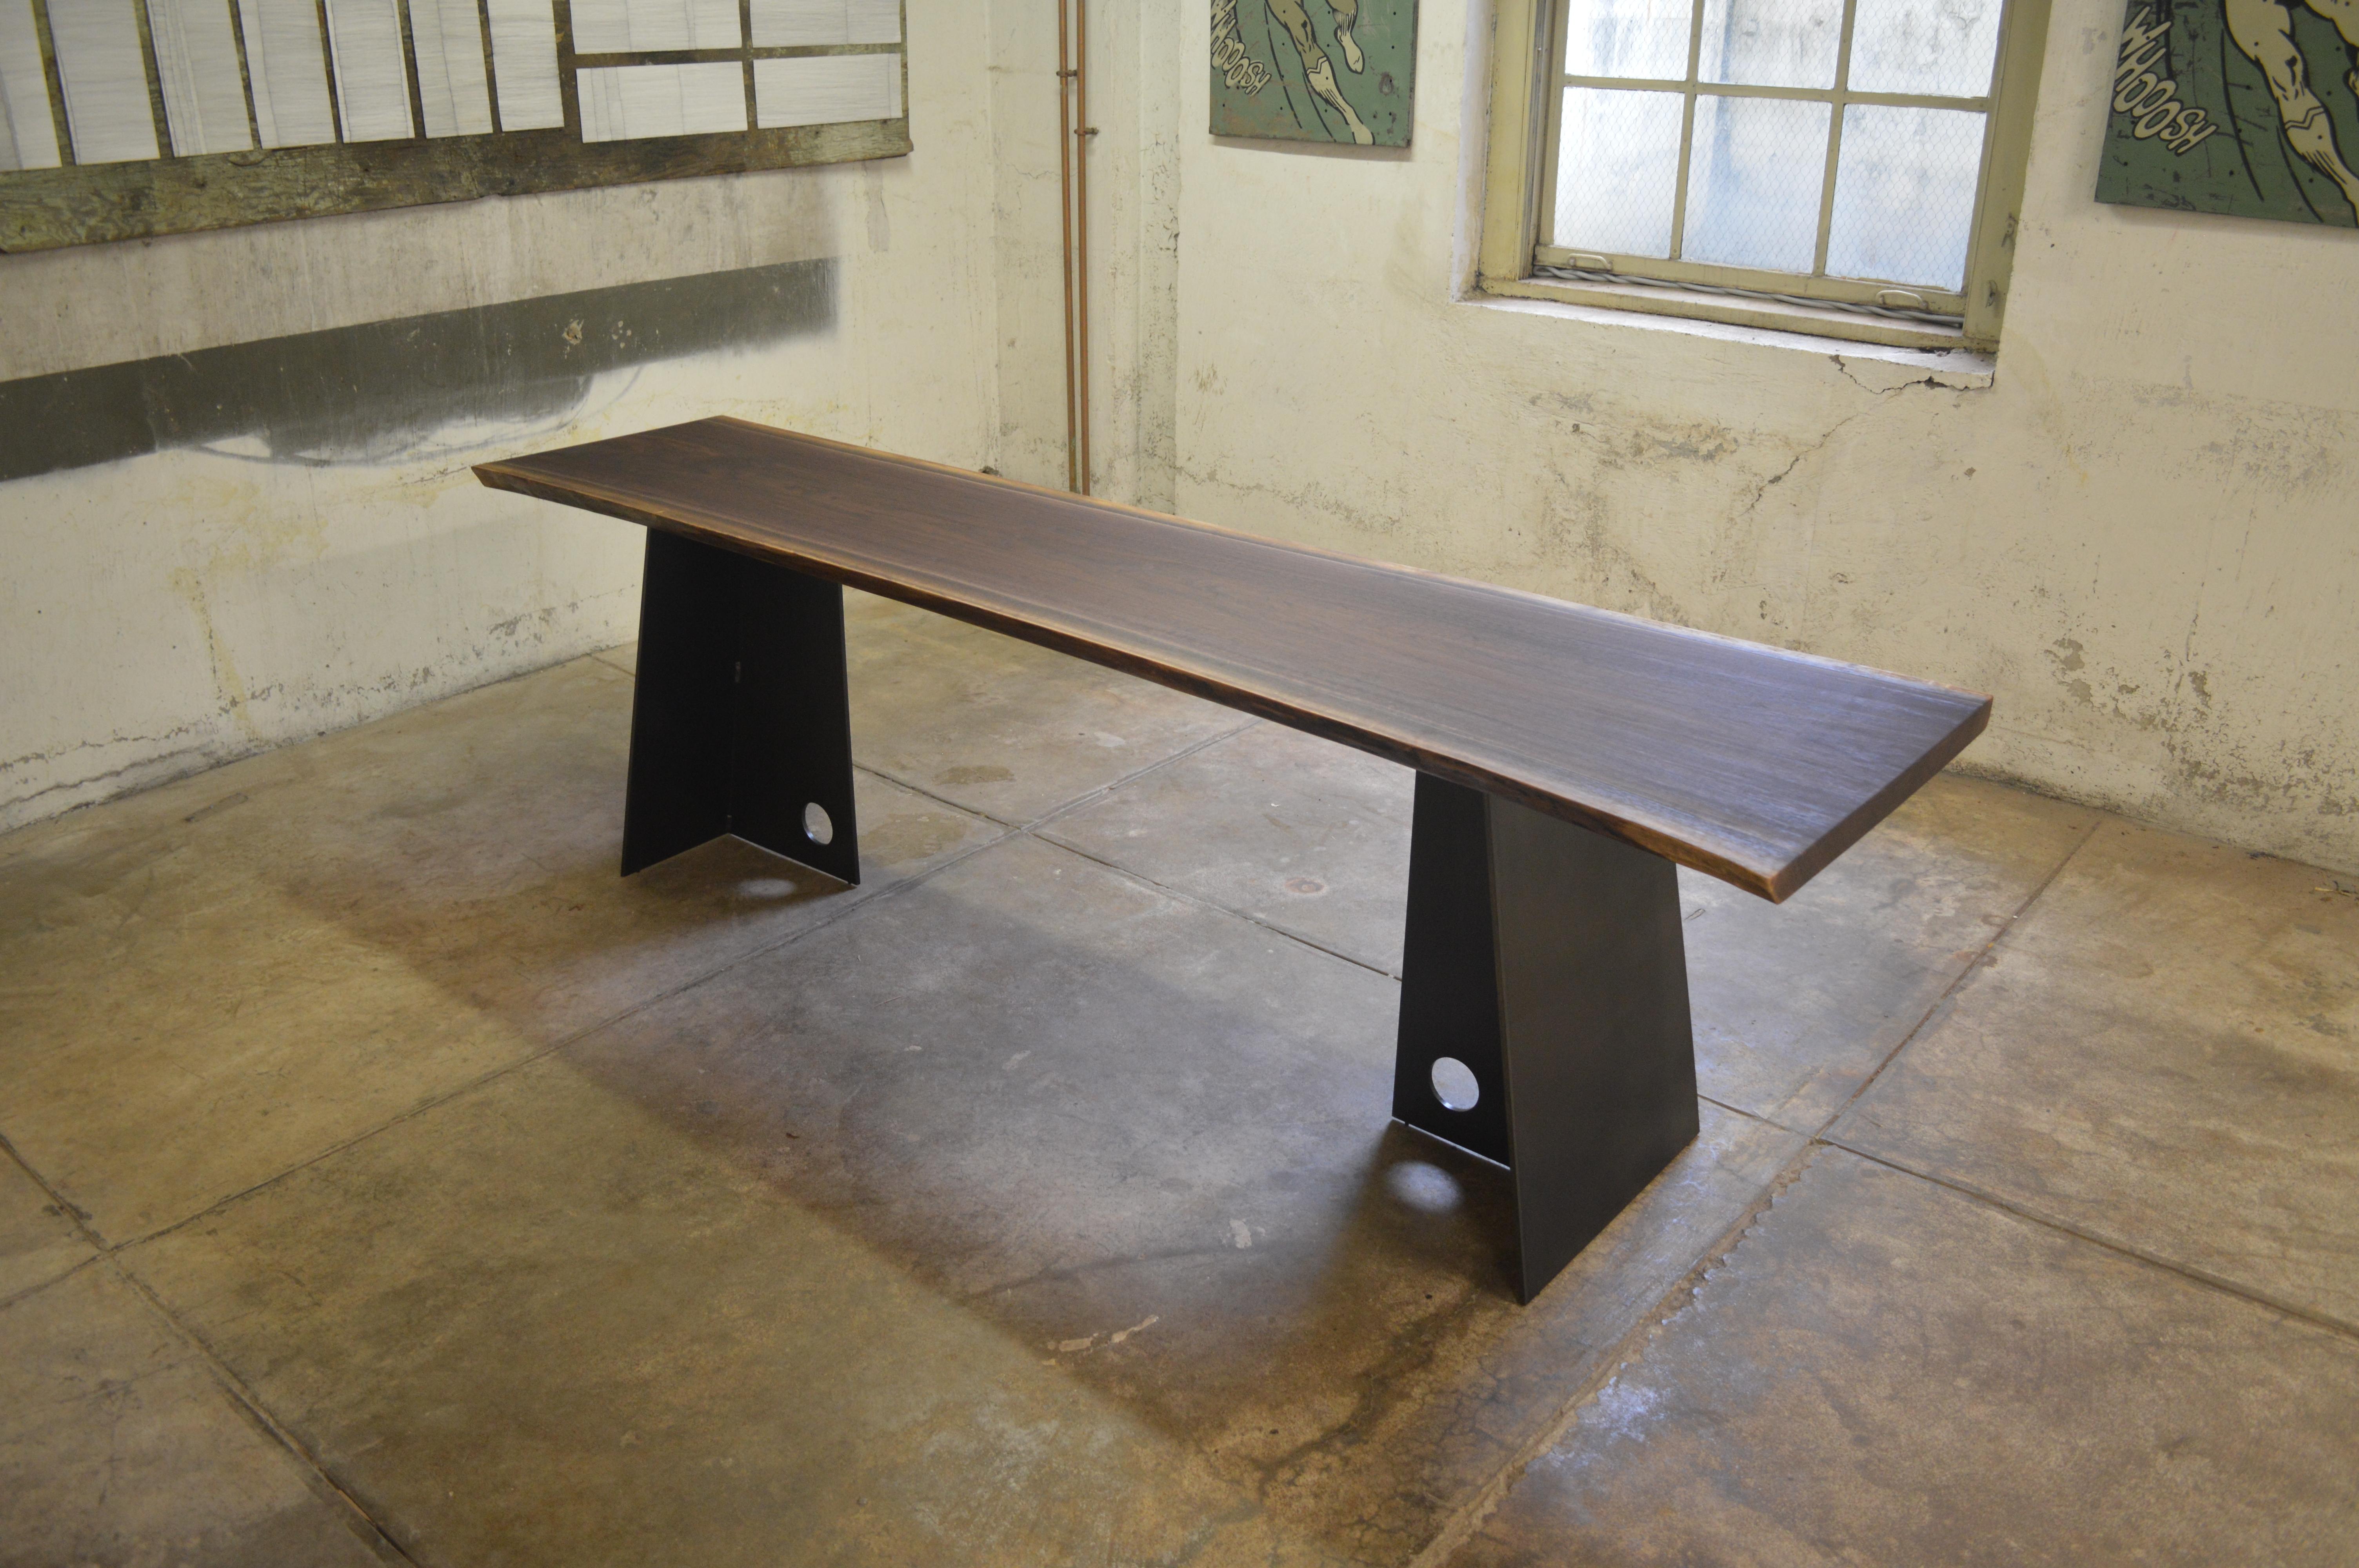 The Hendricks Bridge console, an original design offered exclusively by Vermontica, is a contemporary minimalist blackened steel and walnut top console designed and produced in Vermont by Scott Gordon. It features a 3/8